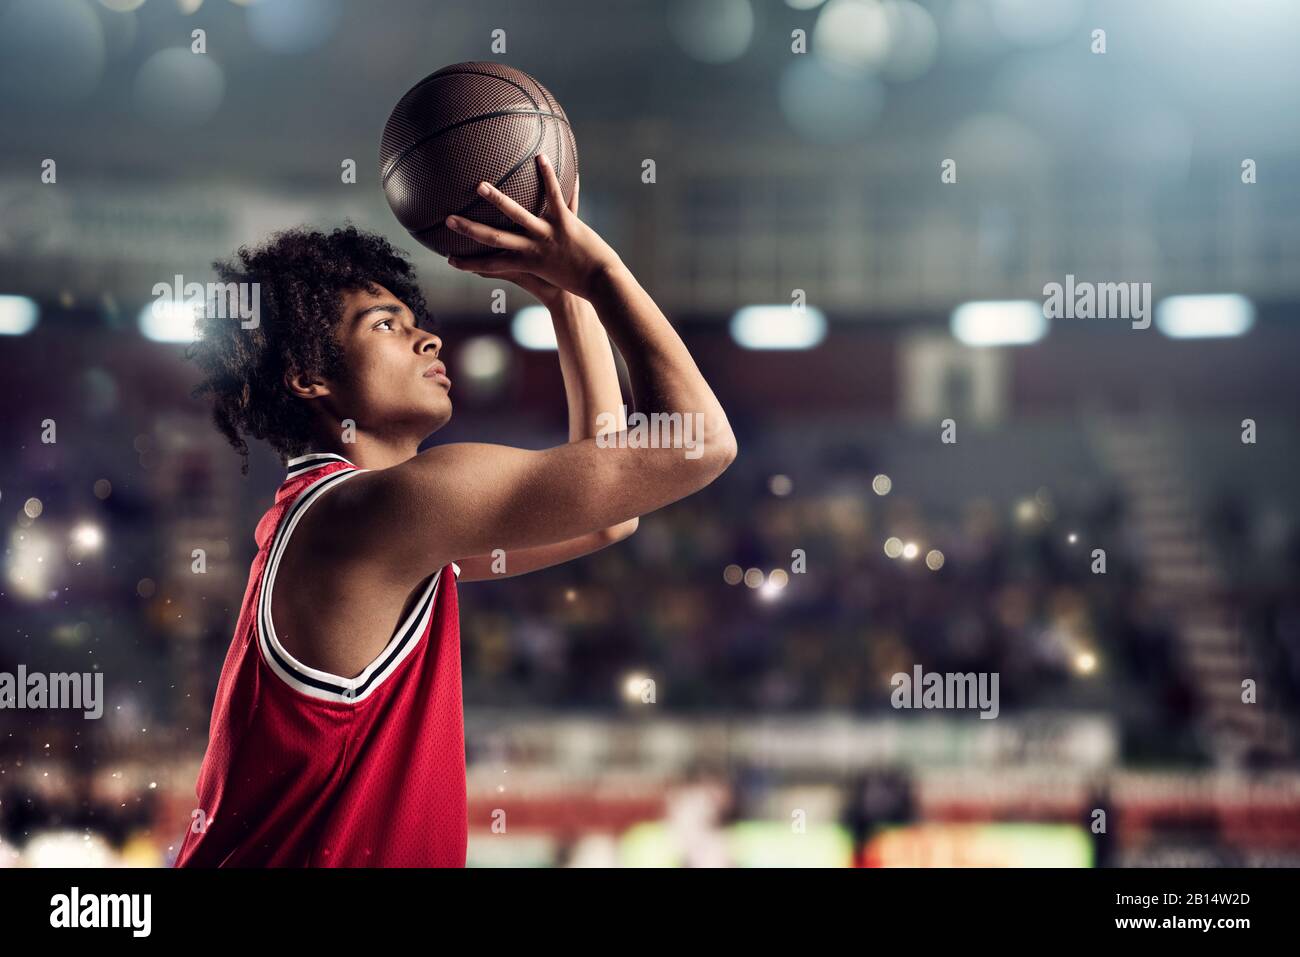 Basketball player throws the ball in the basket in the stadium full of spectators Stock Photo